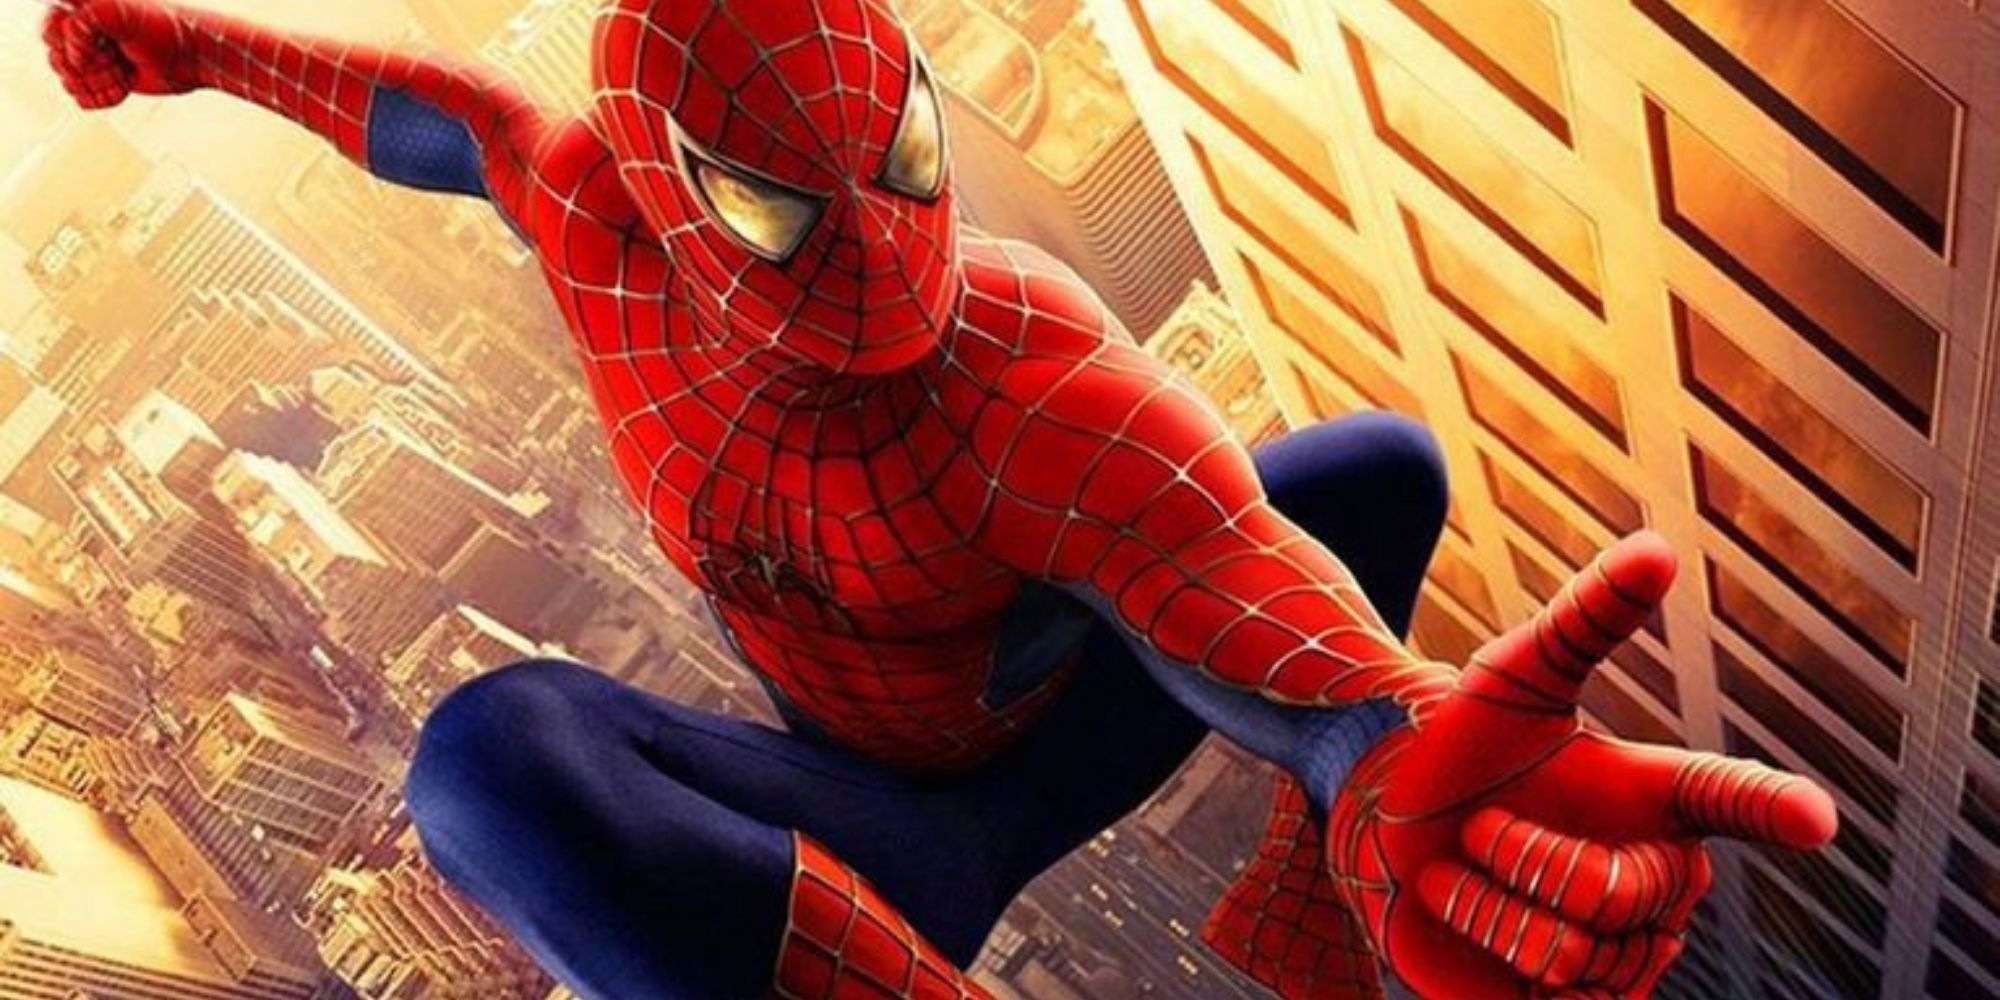 Official image of Spider-Man (2022).